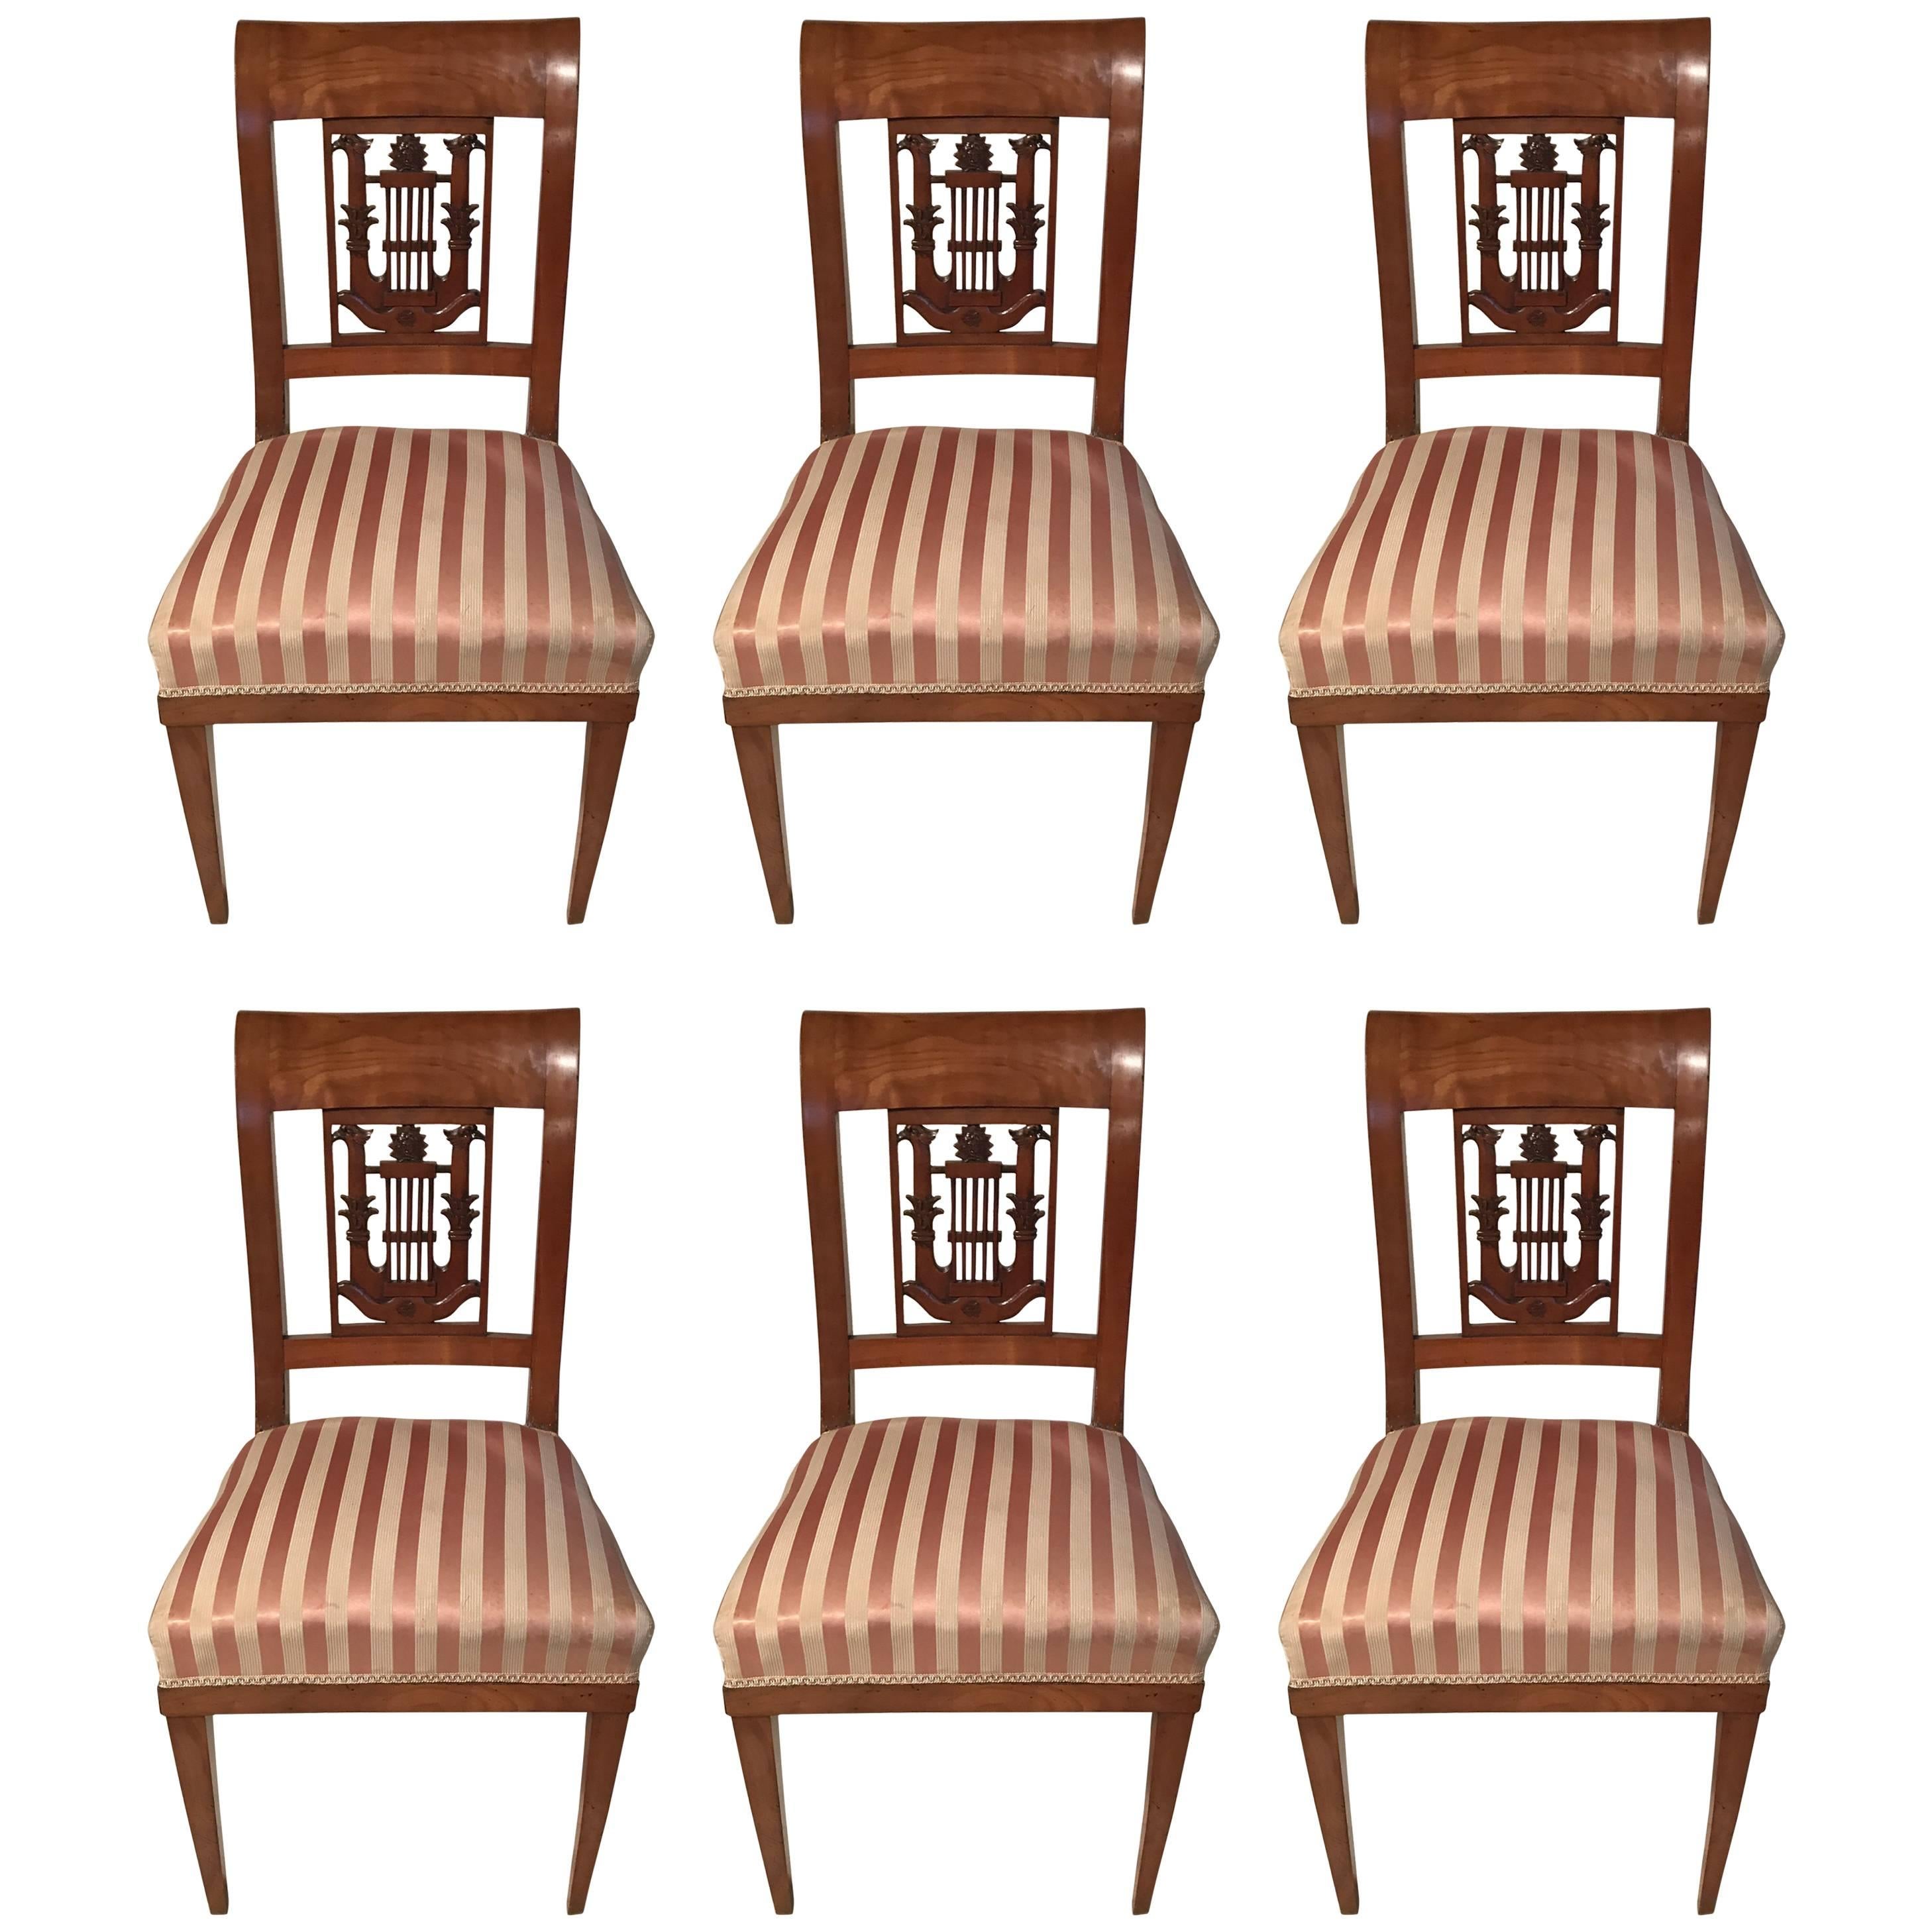 Set of Six Classicist Chairs, Germany, circa 1810